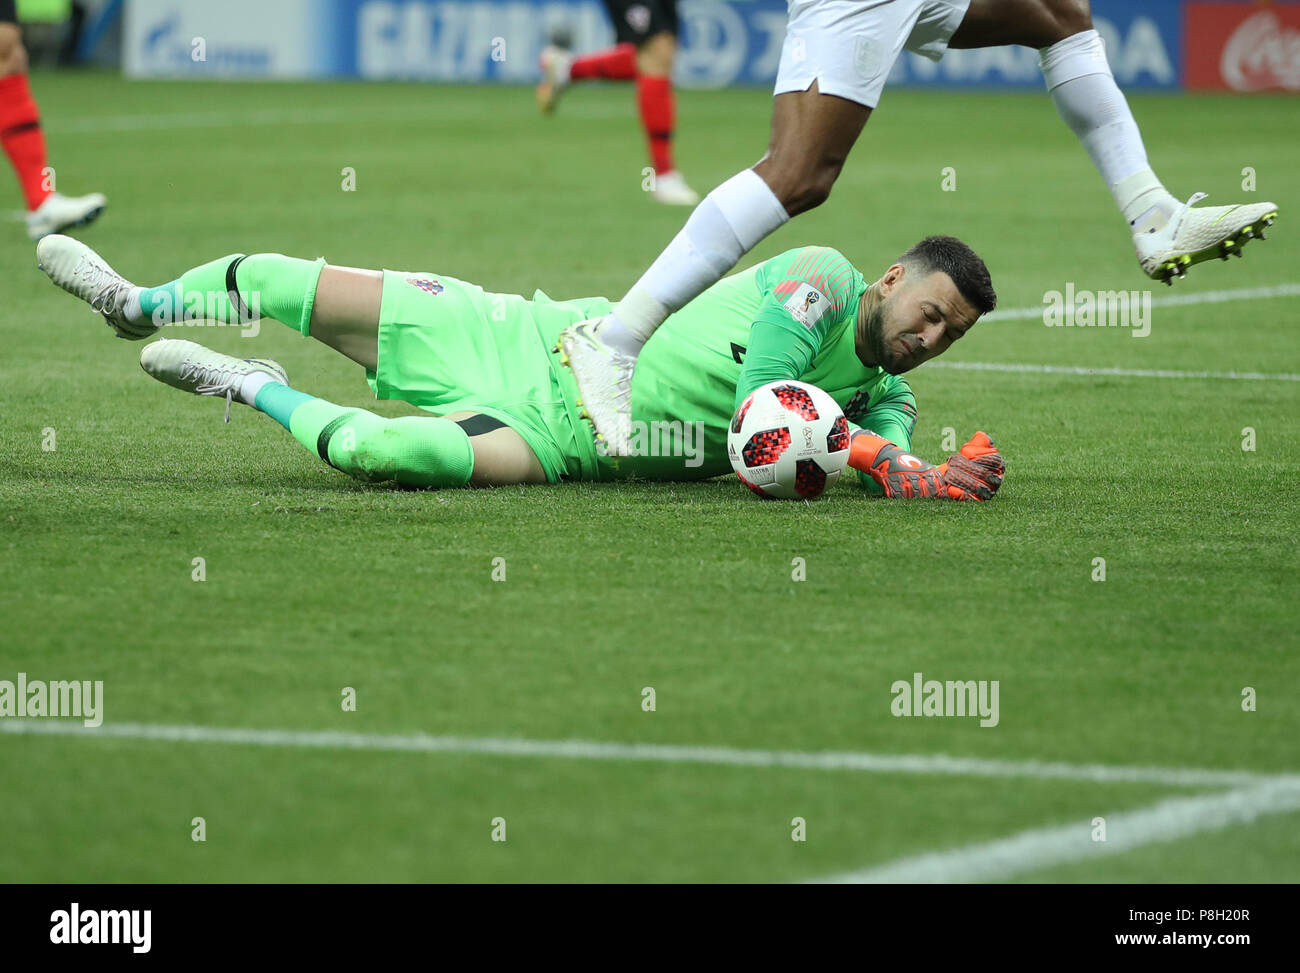 Moscow, Russia. 11th July, 2018. Goalkeeper Danijel Subasic of Croatia defends during the 2018 FIFA World Cup semi-final match between England and Croatia in Moscow, Russia, July 11, 2018. Credit: Wu Zhuang/Xinhua/Alamy Live News Stock Photo